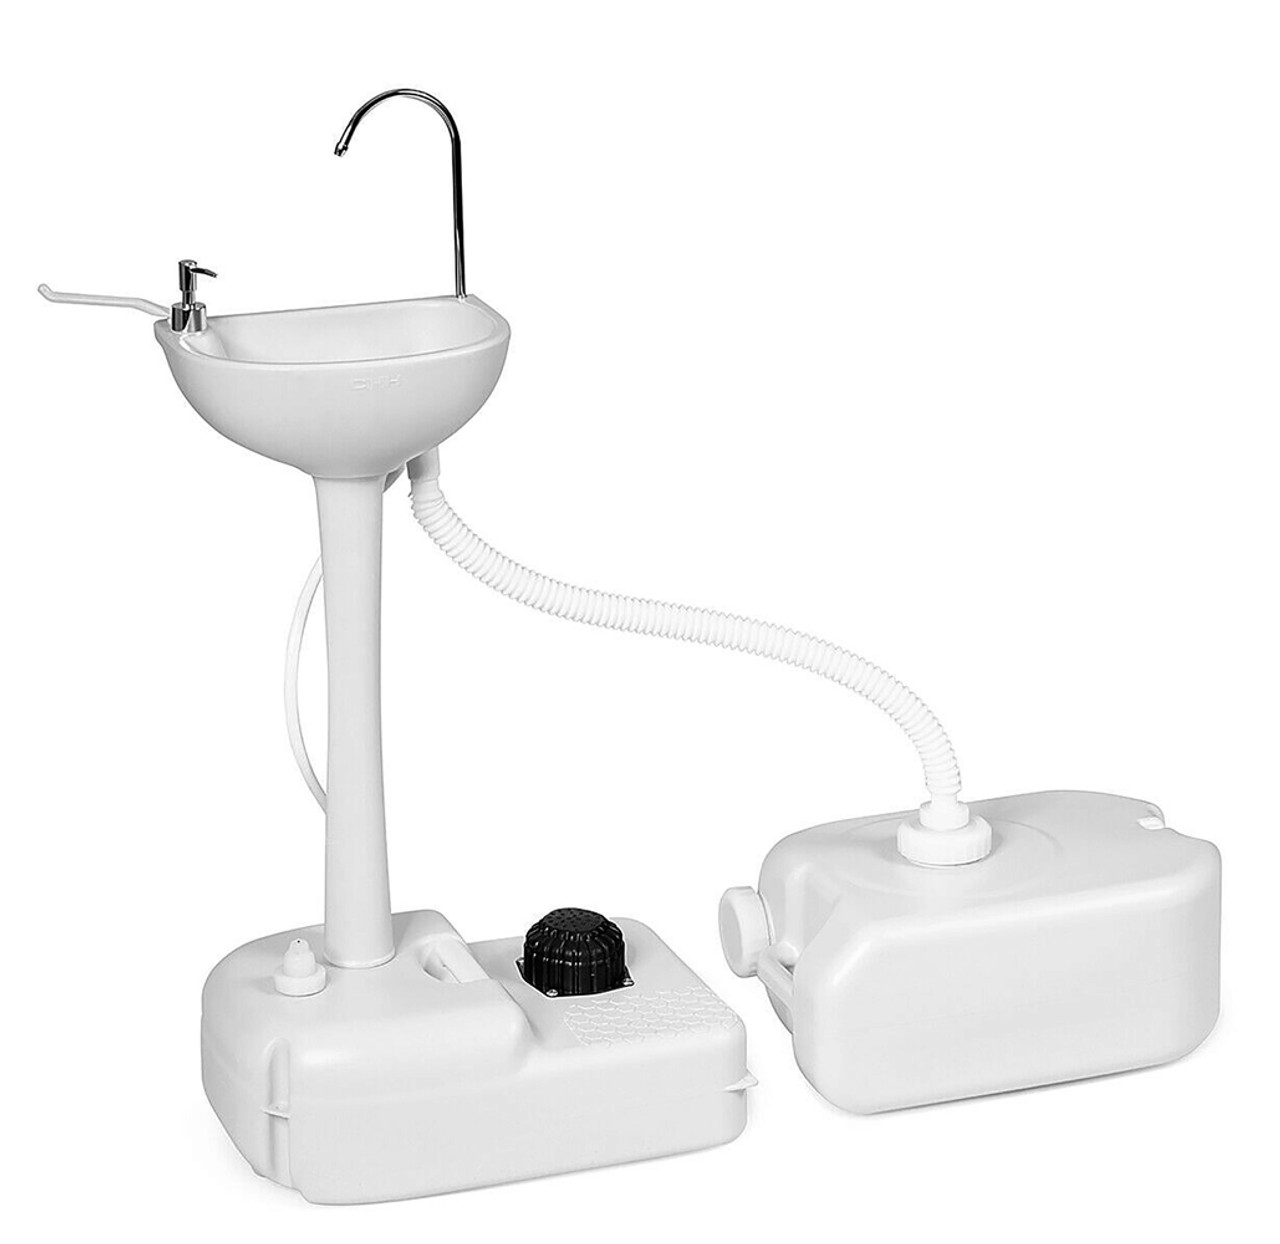 Portable Standing Wash Sink product image